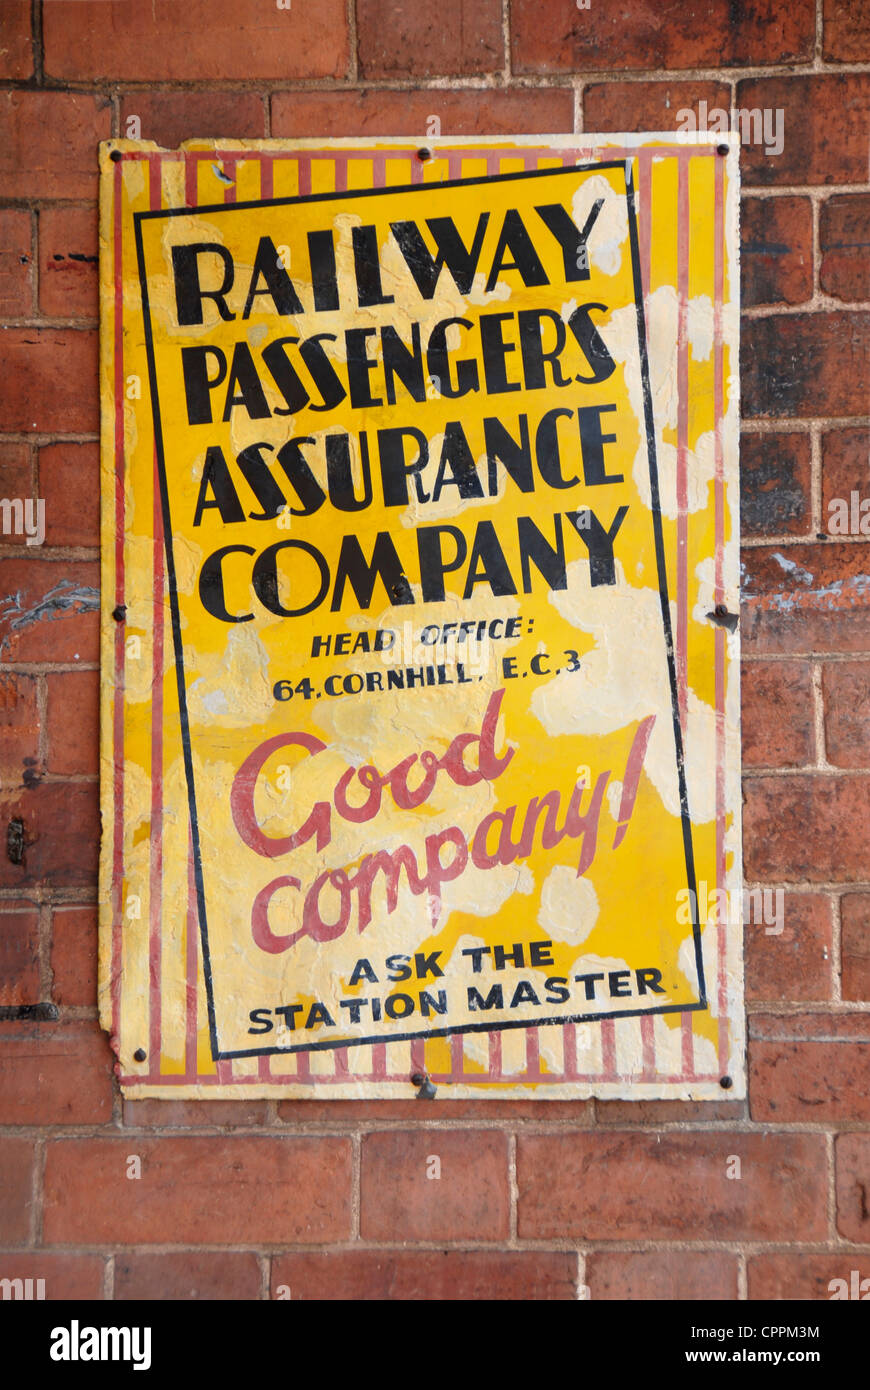 Old metal advertisement for Railway Passengers Assurance Company Stock Photo